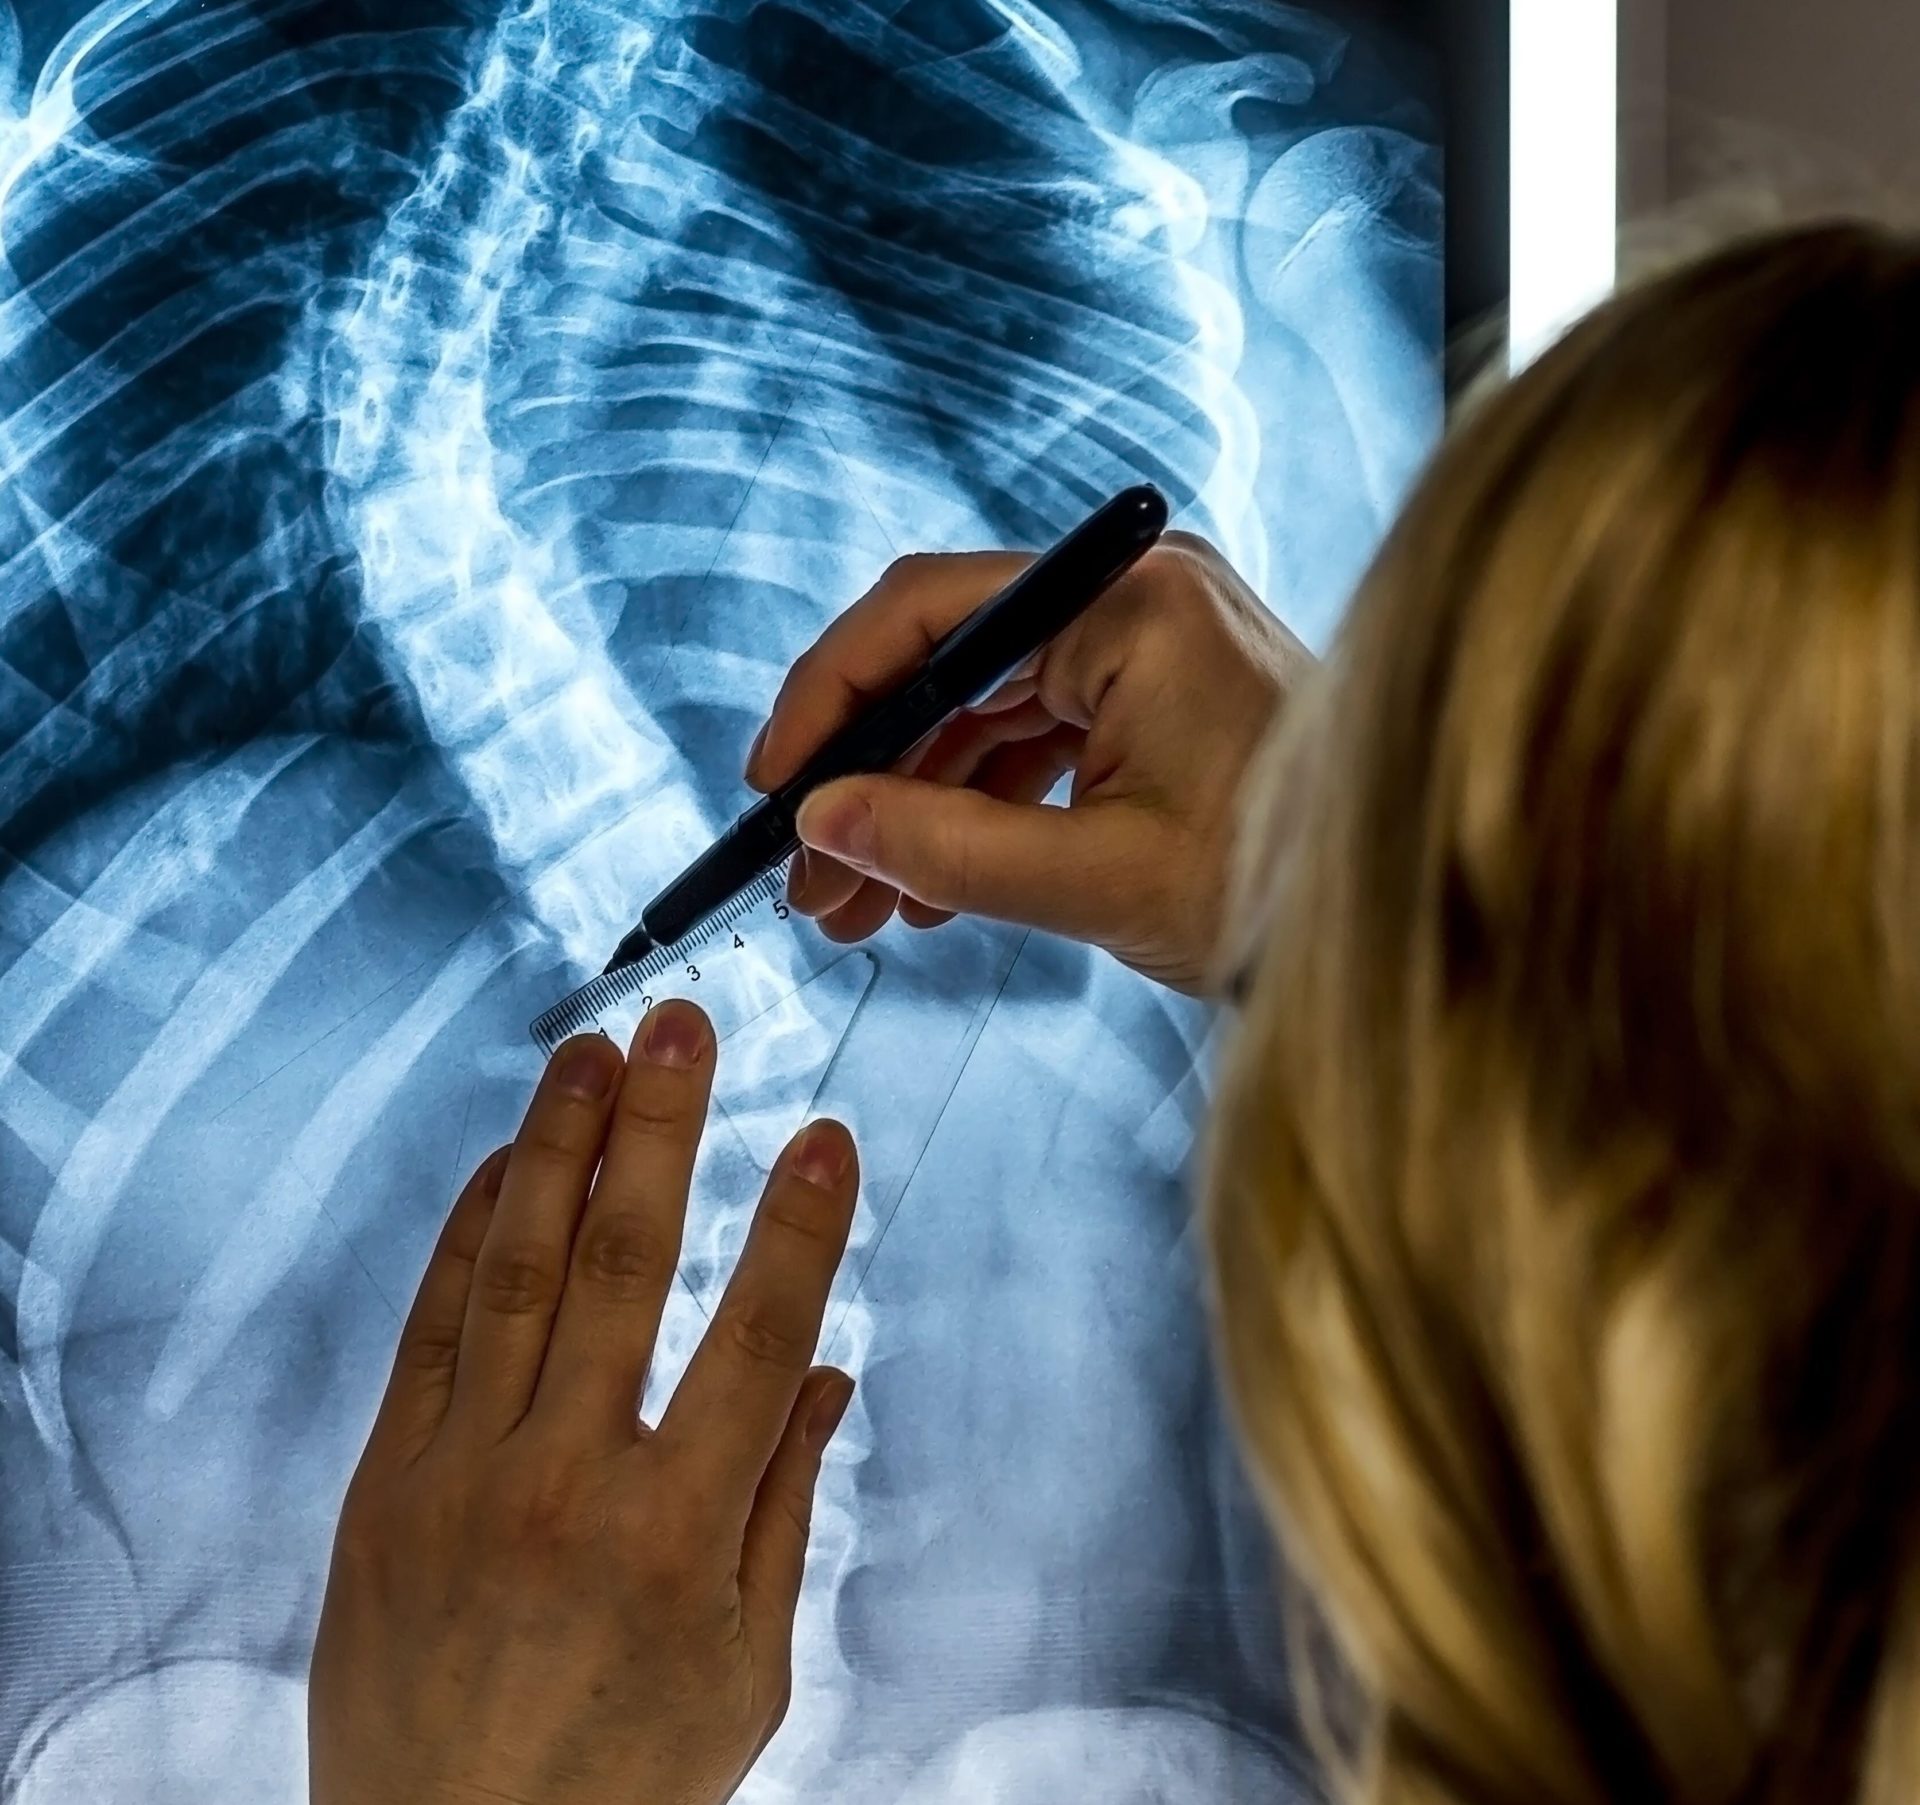 A scoliosis specialist physician looking at a patient's x-ray